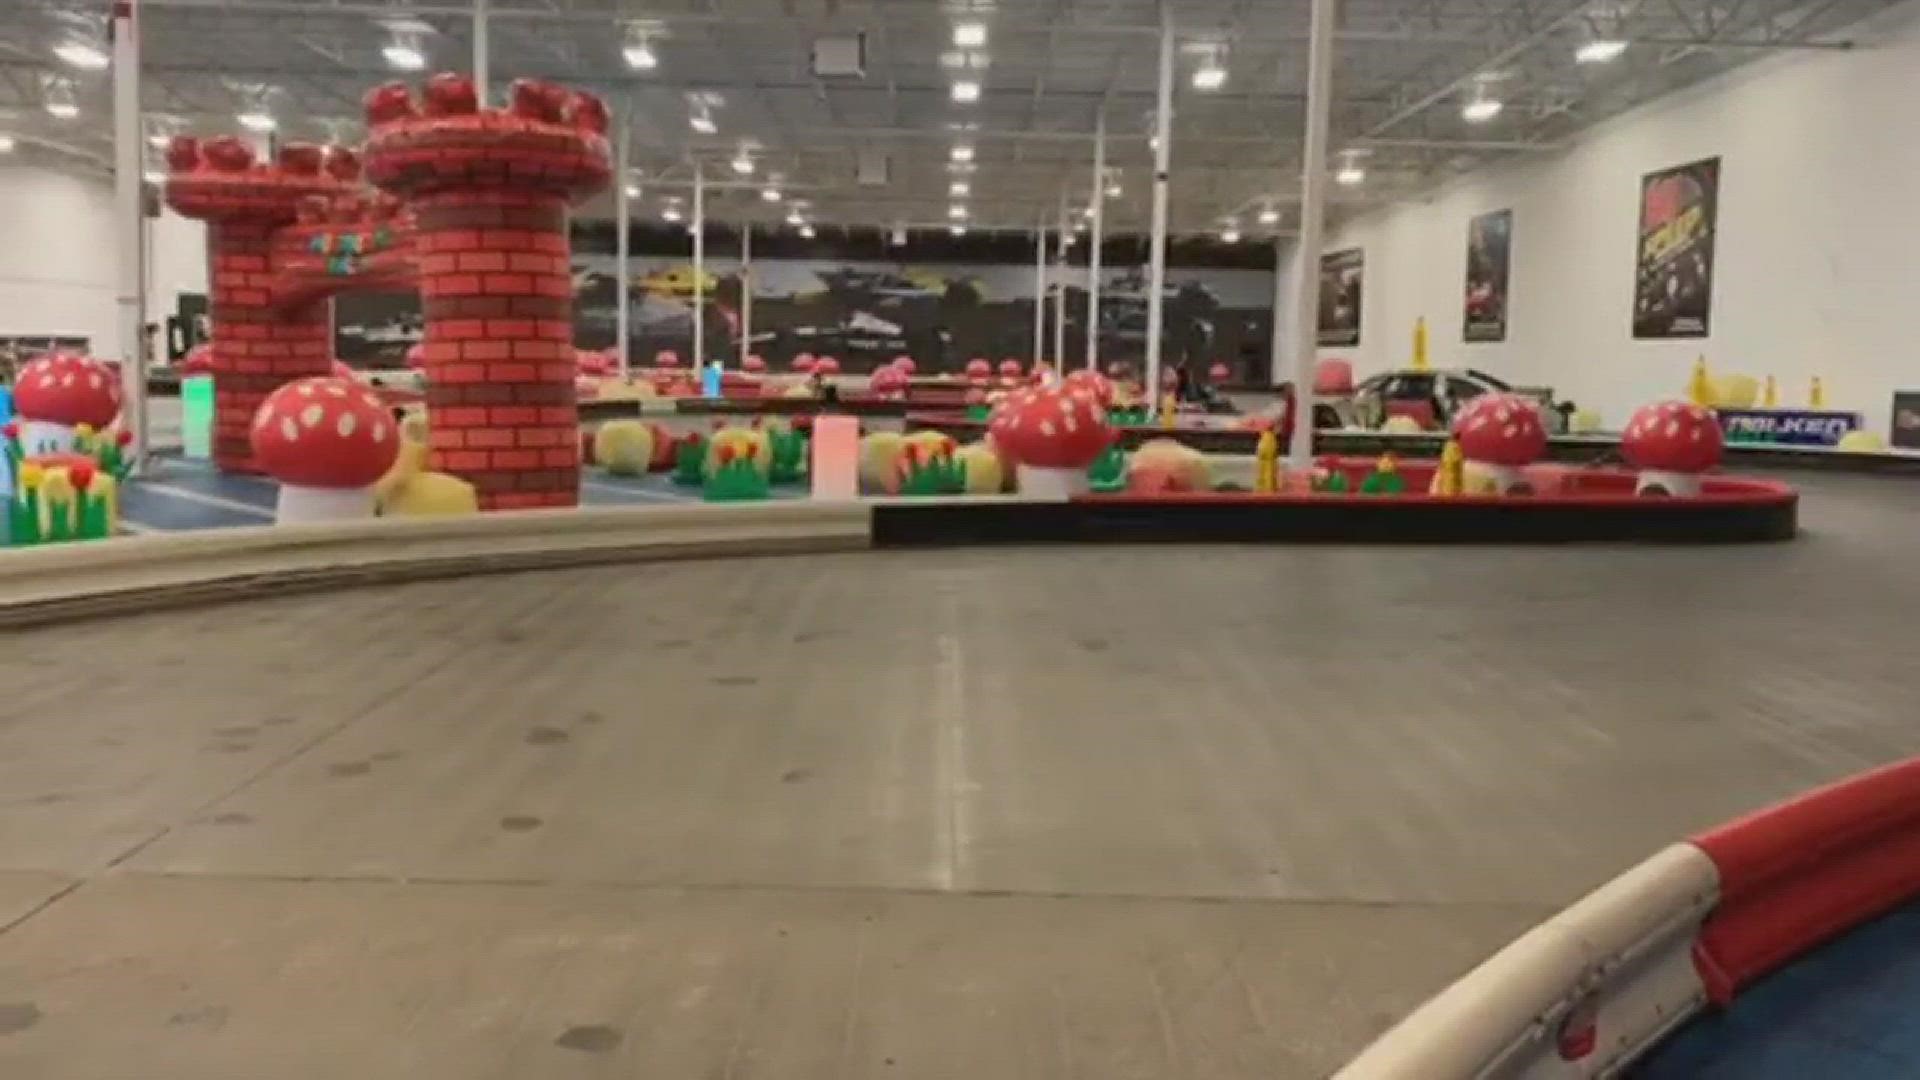 A hyperlapse video shows junior racers (people under 4 feet, 10 inches tall) drive karts around the K1 Speed race track for the 2019 Mushroom Rally.